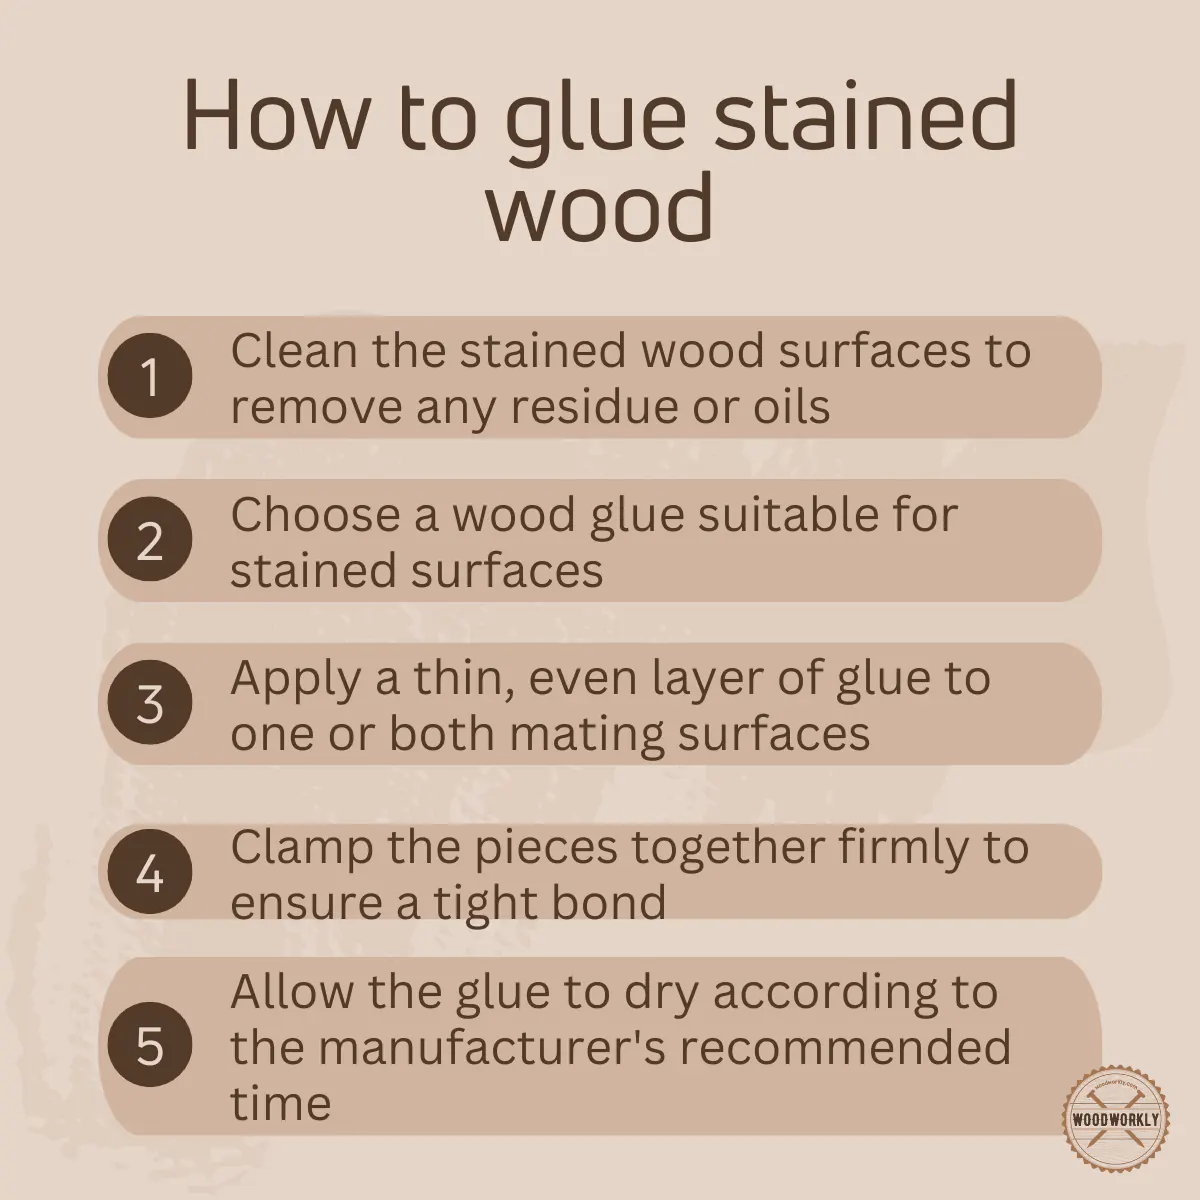 How to glue stained wood